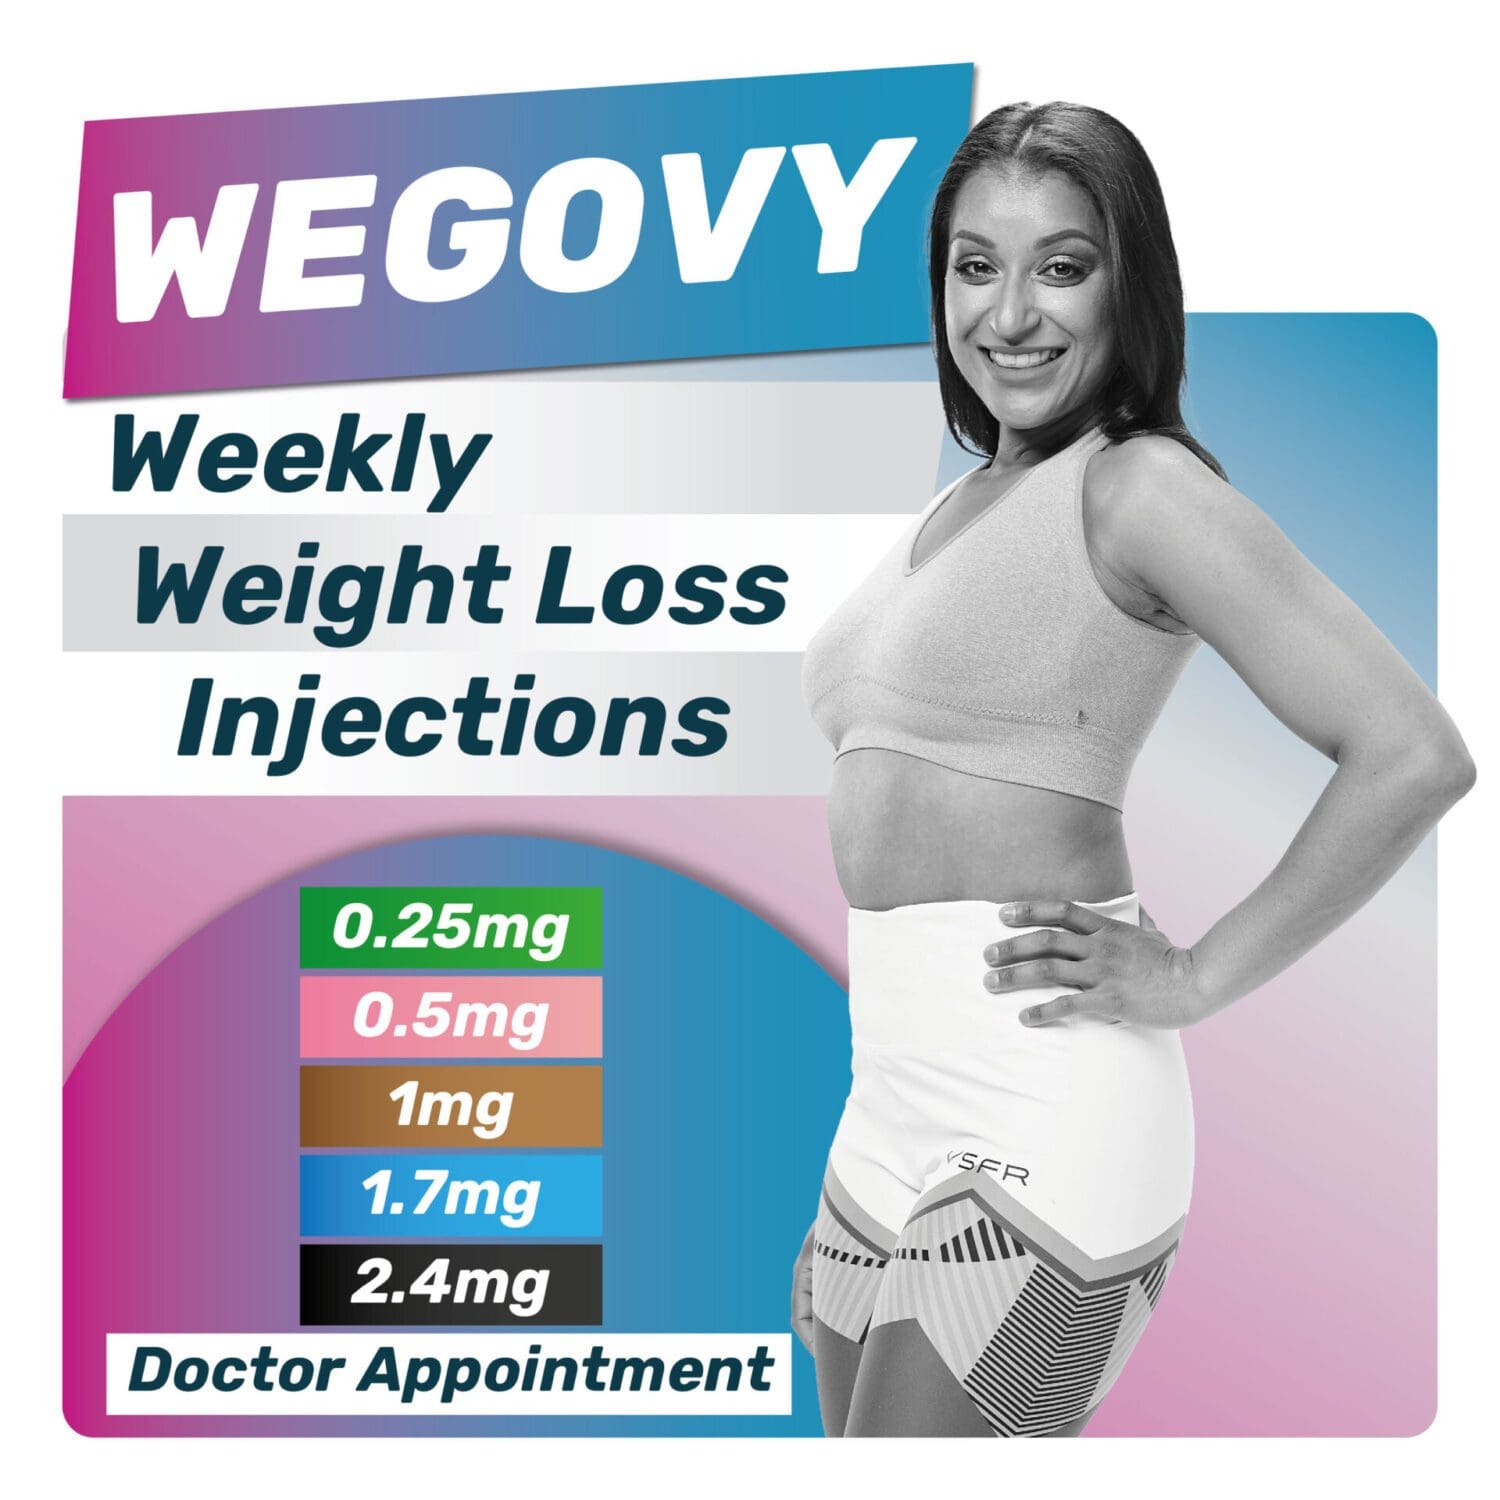 https://b1213718.smushcdn.com/1213718/wp-content/uploads/2023/09/0-Product-Graphics-1200-x-1200_WEGOVY-Weekly-Weight-Loss-Injections-scaled.jpg?lossy=2&strip=1&webp=1